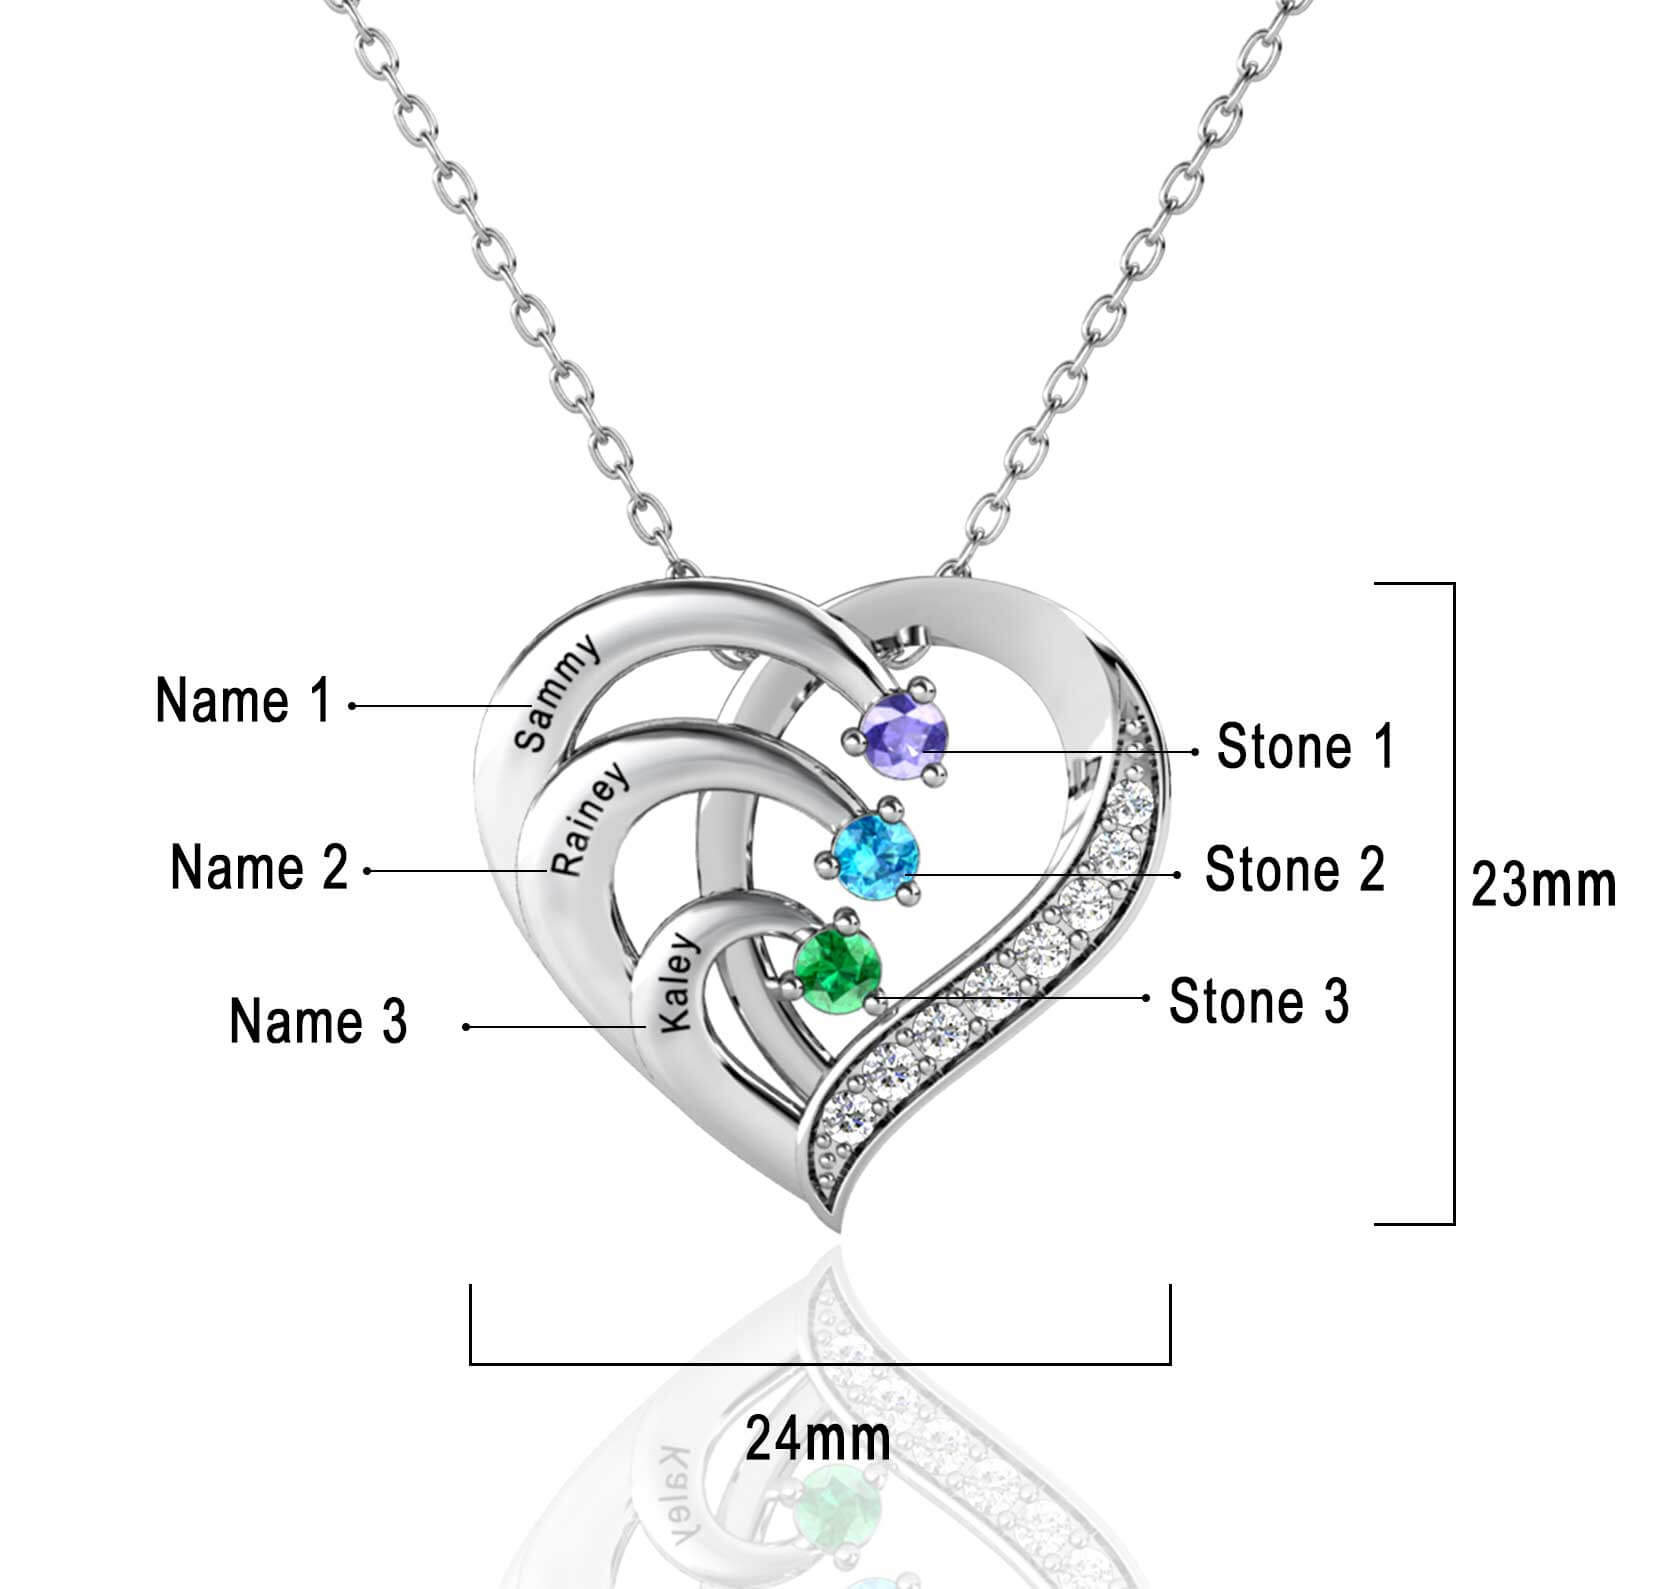 personalised 3 name necklace with 3 birthstone 925 sterling silver gift for her ifshe 2